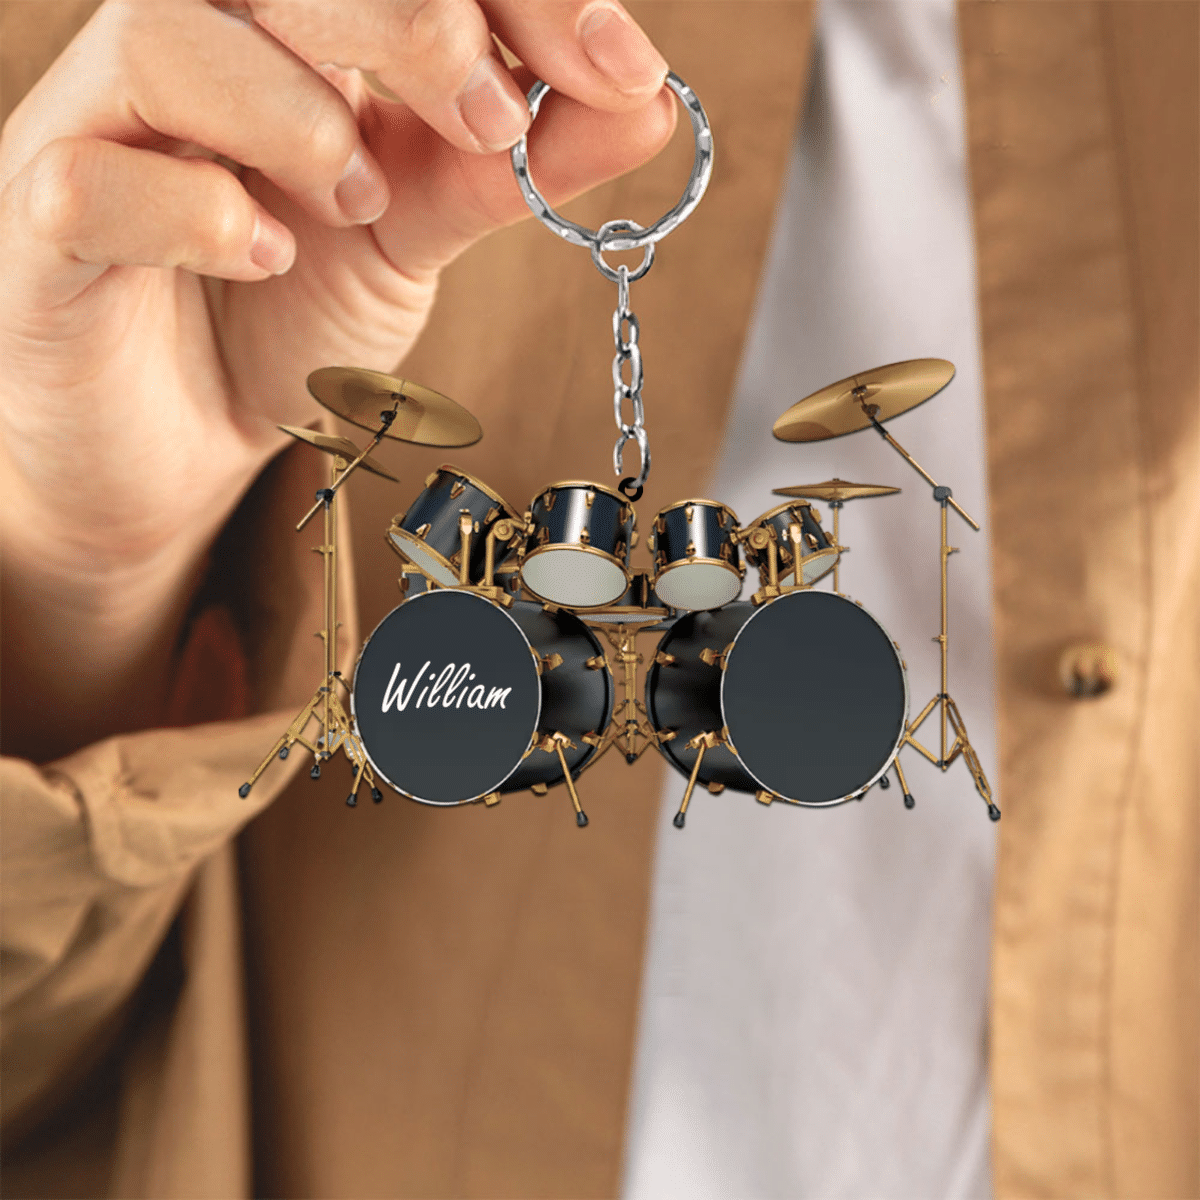 Drums Styles Colorful Drums Personalized Acrylic Keychain - Gift For Drummer